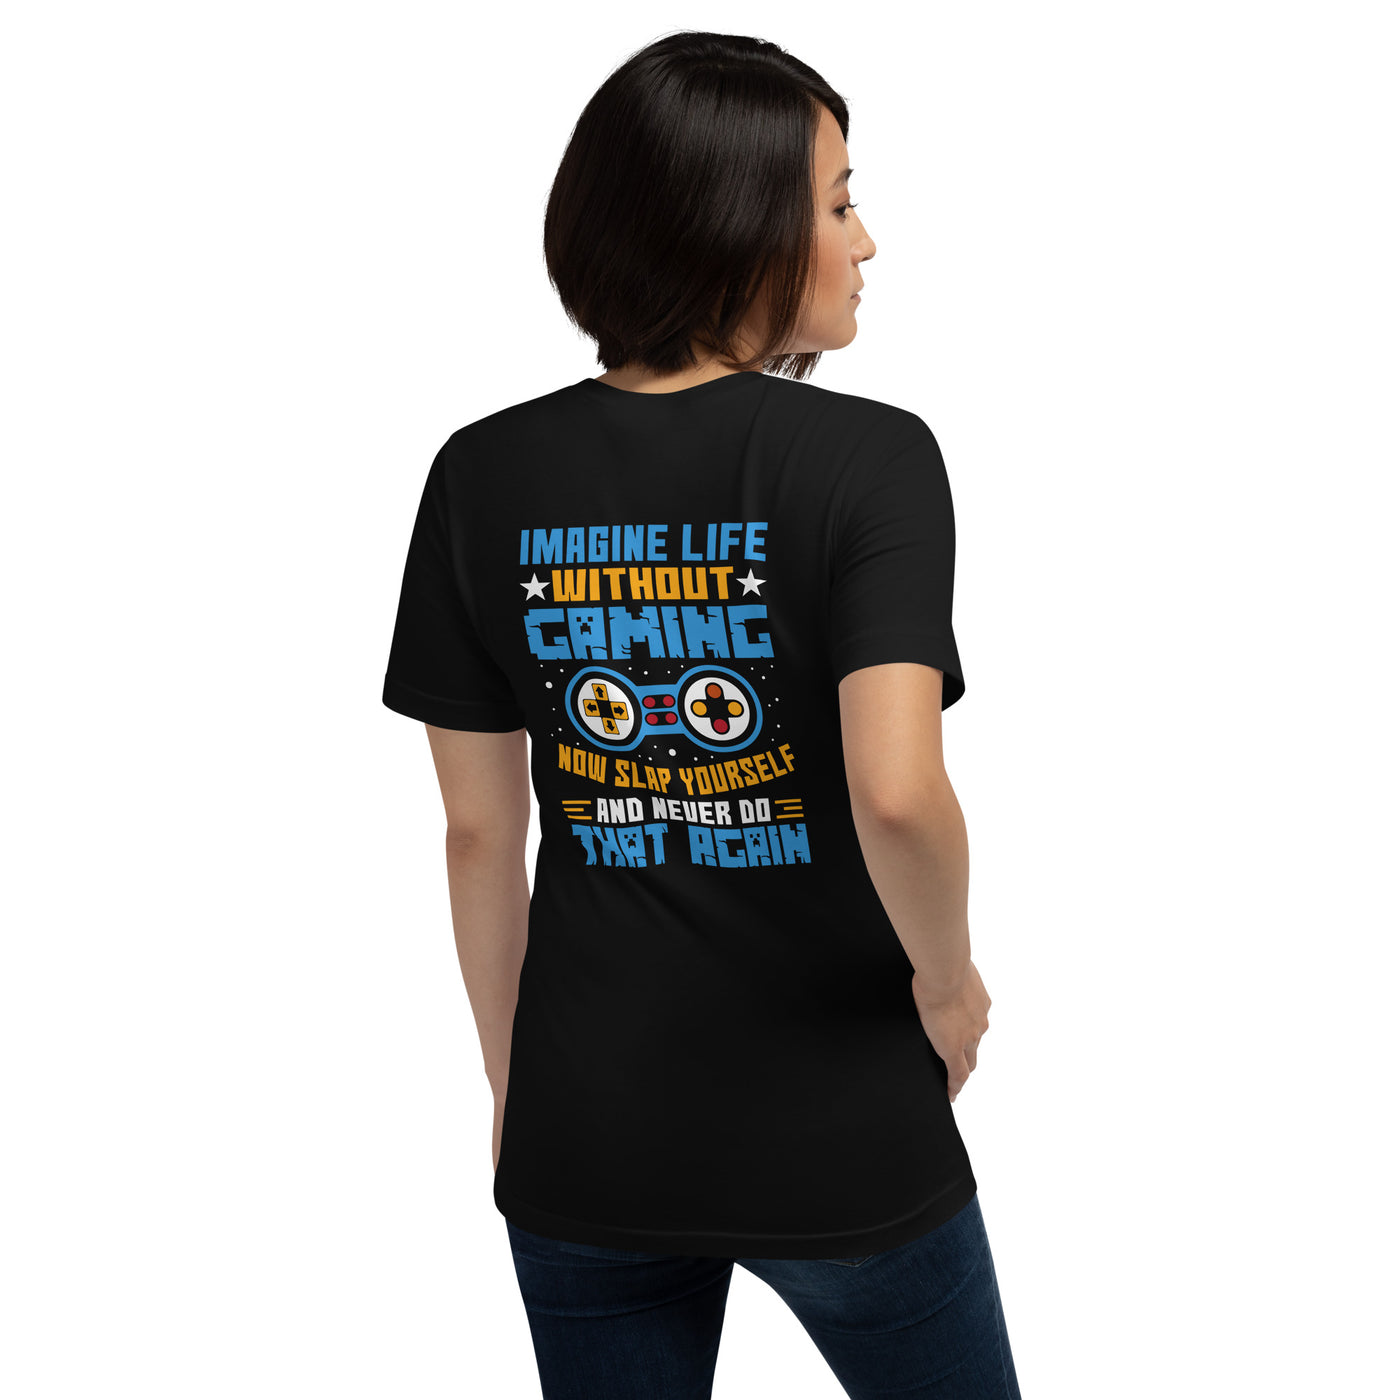 Imagine Life Without Gaming Now Slap Yourself and Never Do that again Rima 15 - Unisex t-shirt ( Back Print )